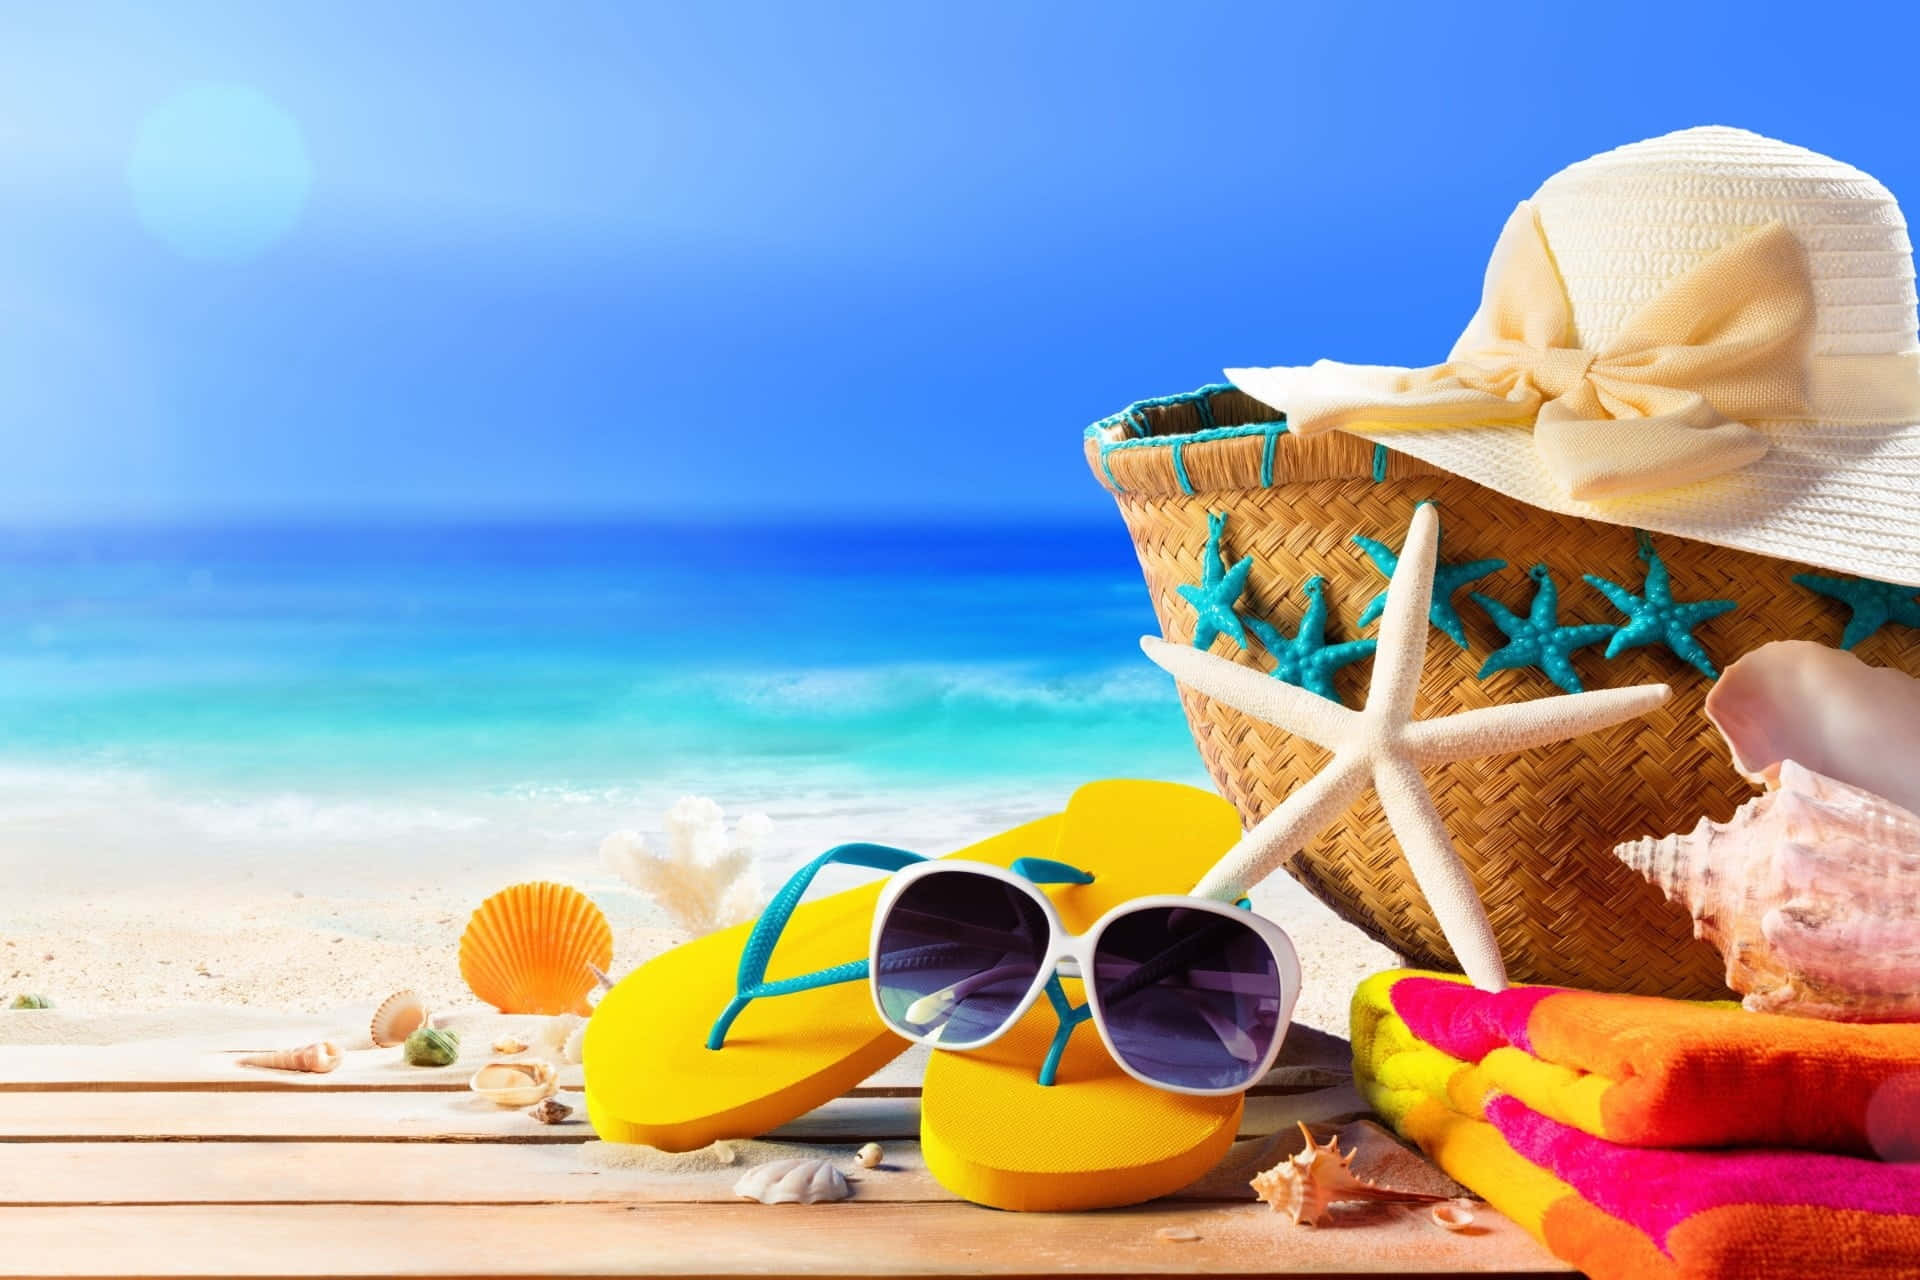 Relaxing Day at the Beach with Essential Beach Bag Wallpaper